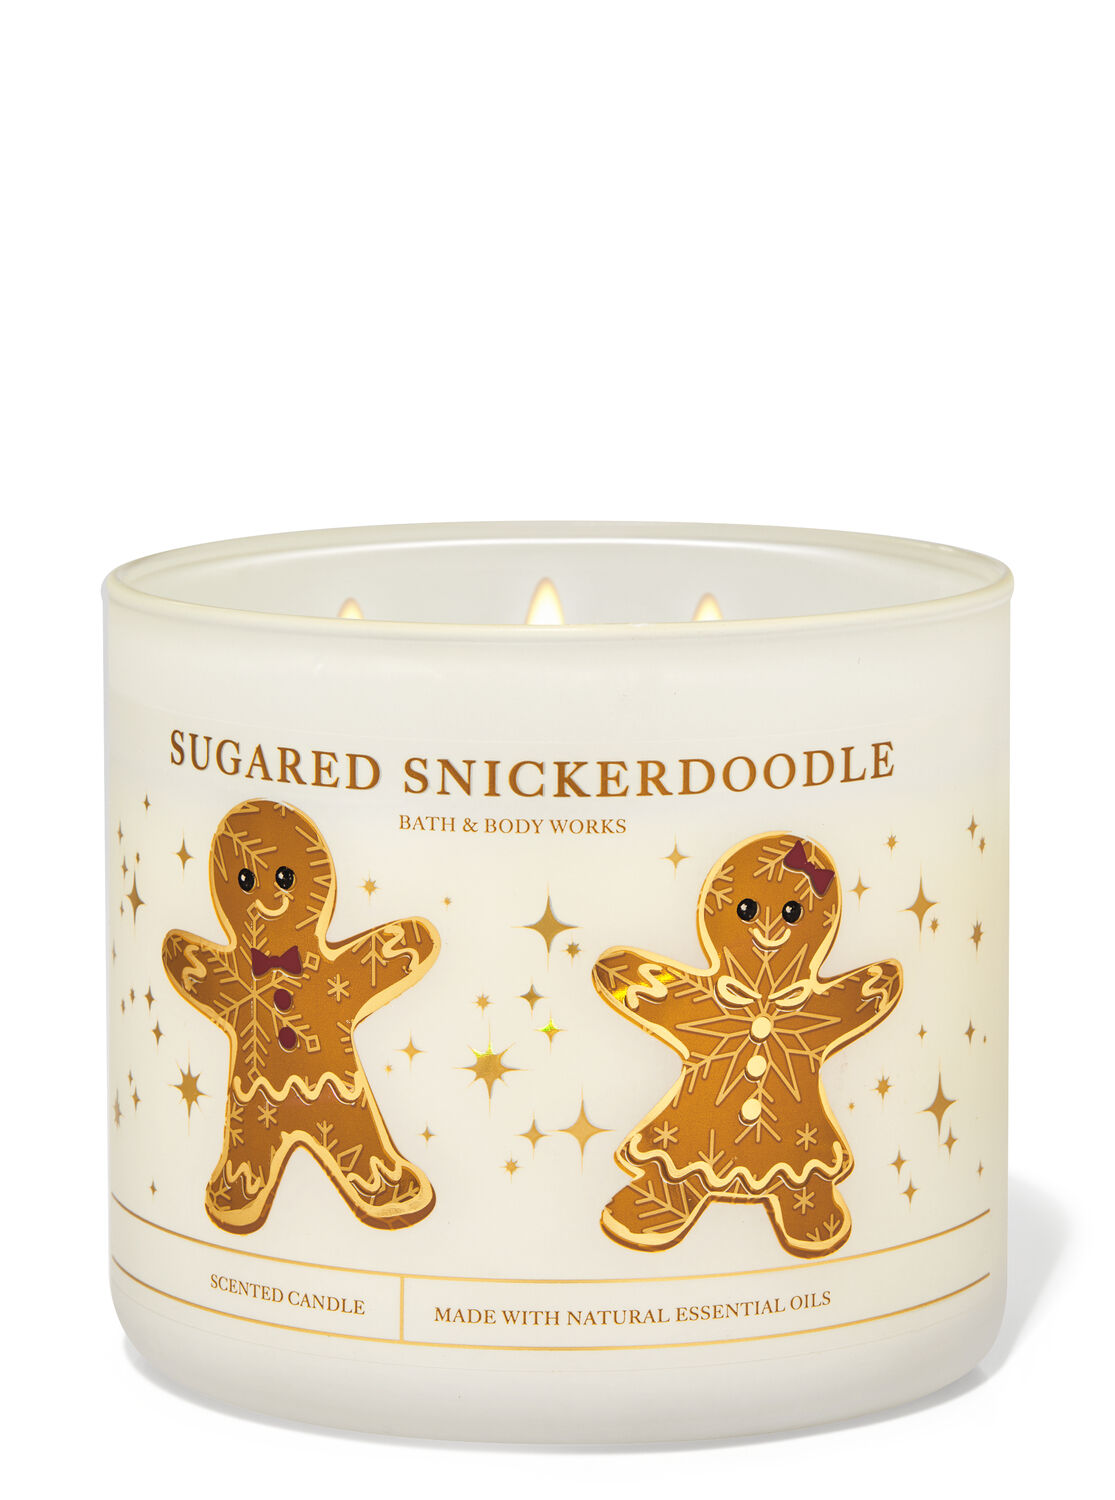 Snickerdoodle Candle